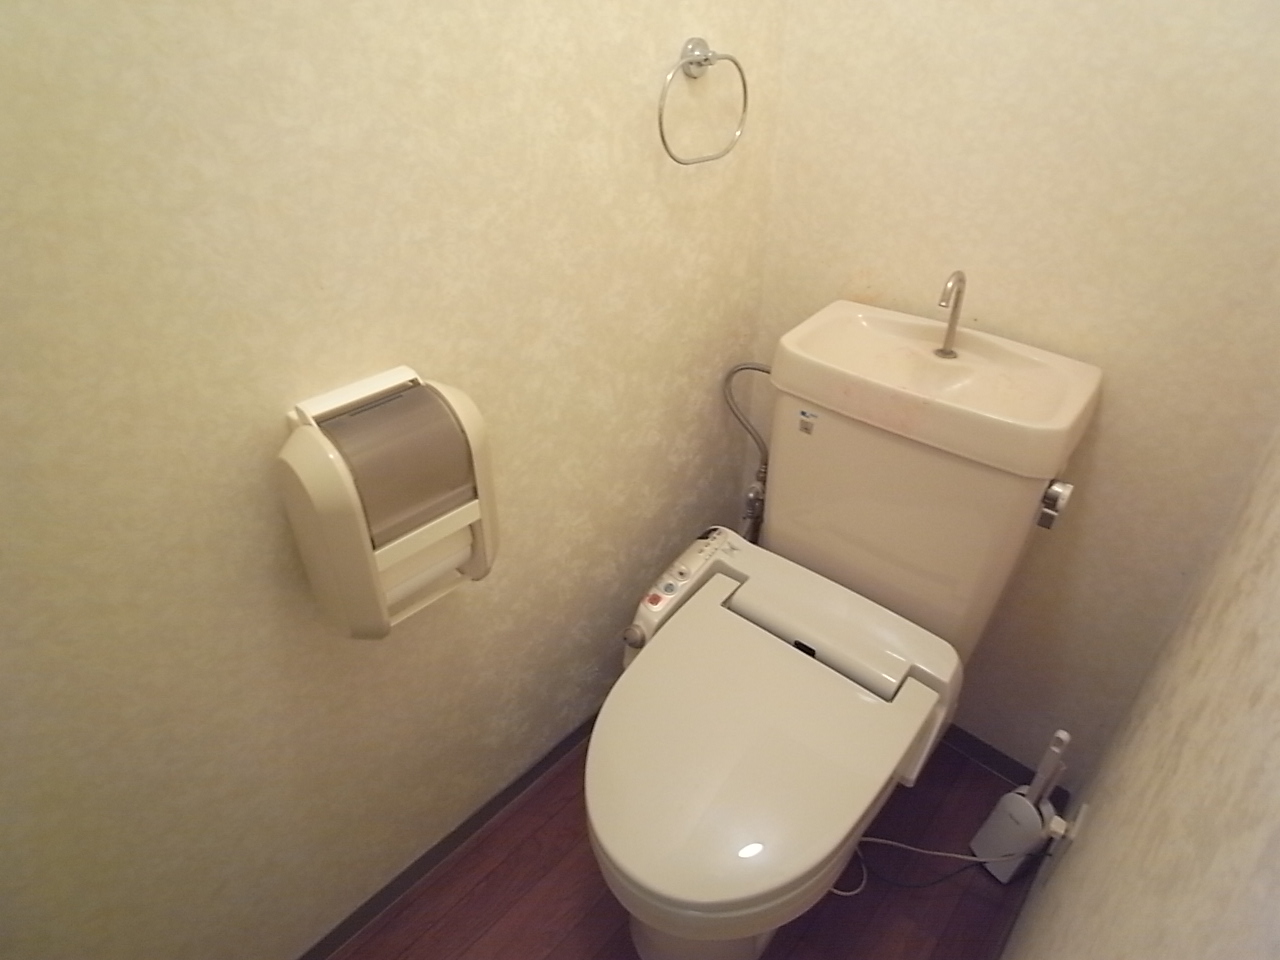 Toilet. ^^ With comfortable bidet in the toilet